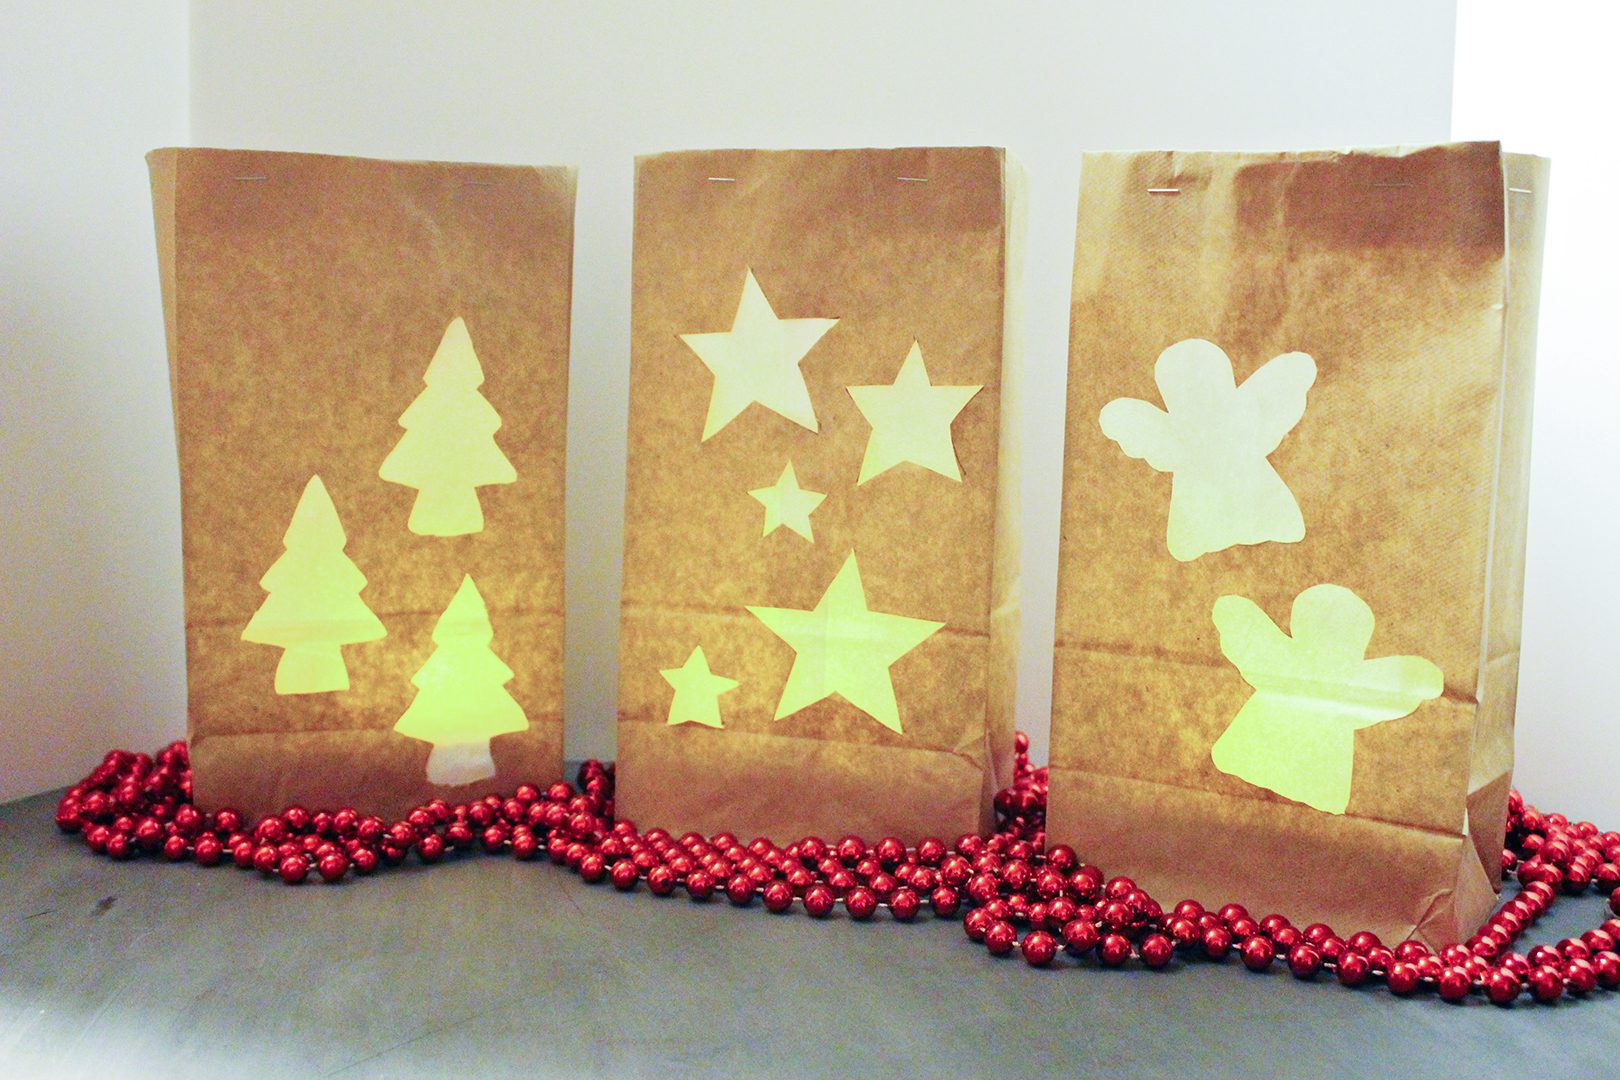 Three brown paper bag luminaries with angel, star, and tree cutouts, surrounded by red Christmas beads.